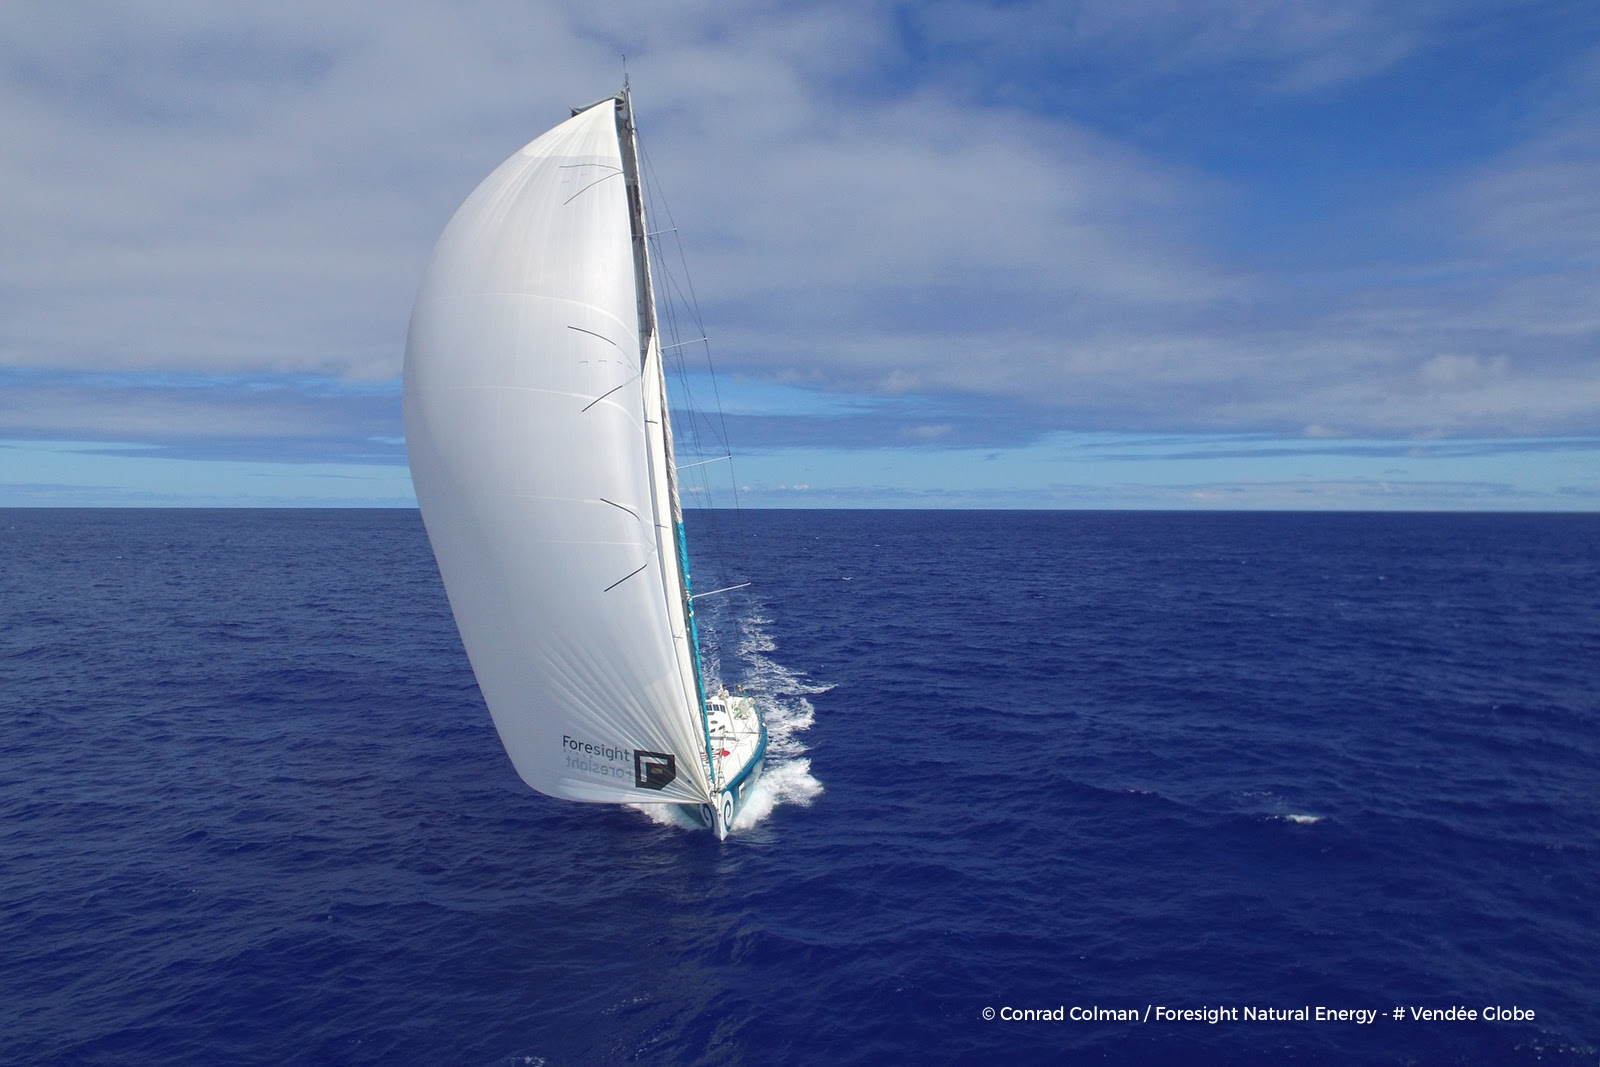 Contad Colman / Foresight Natural Energy - # Vendee Globe